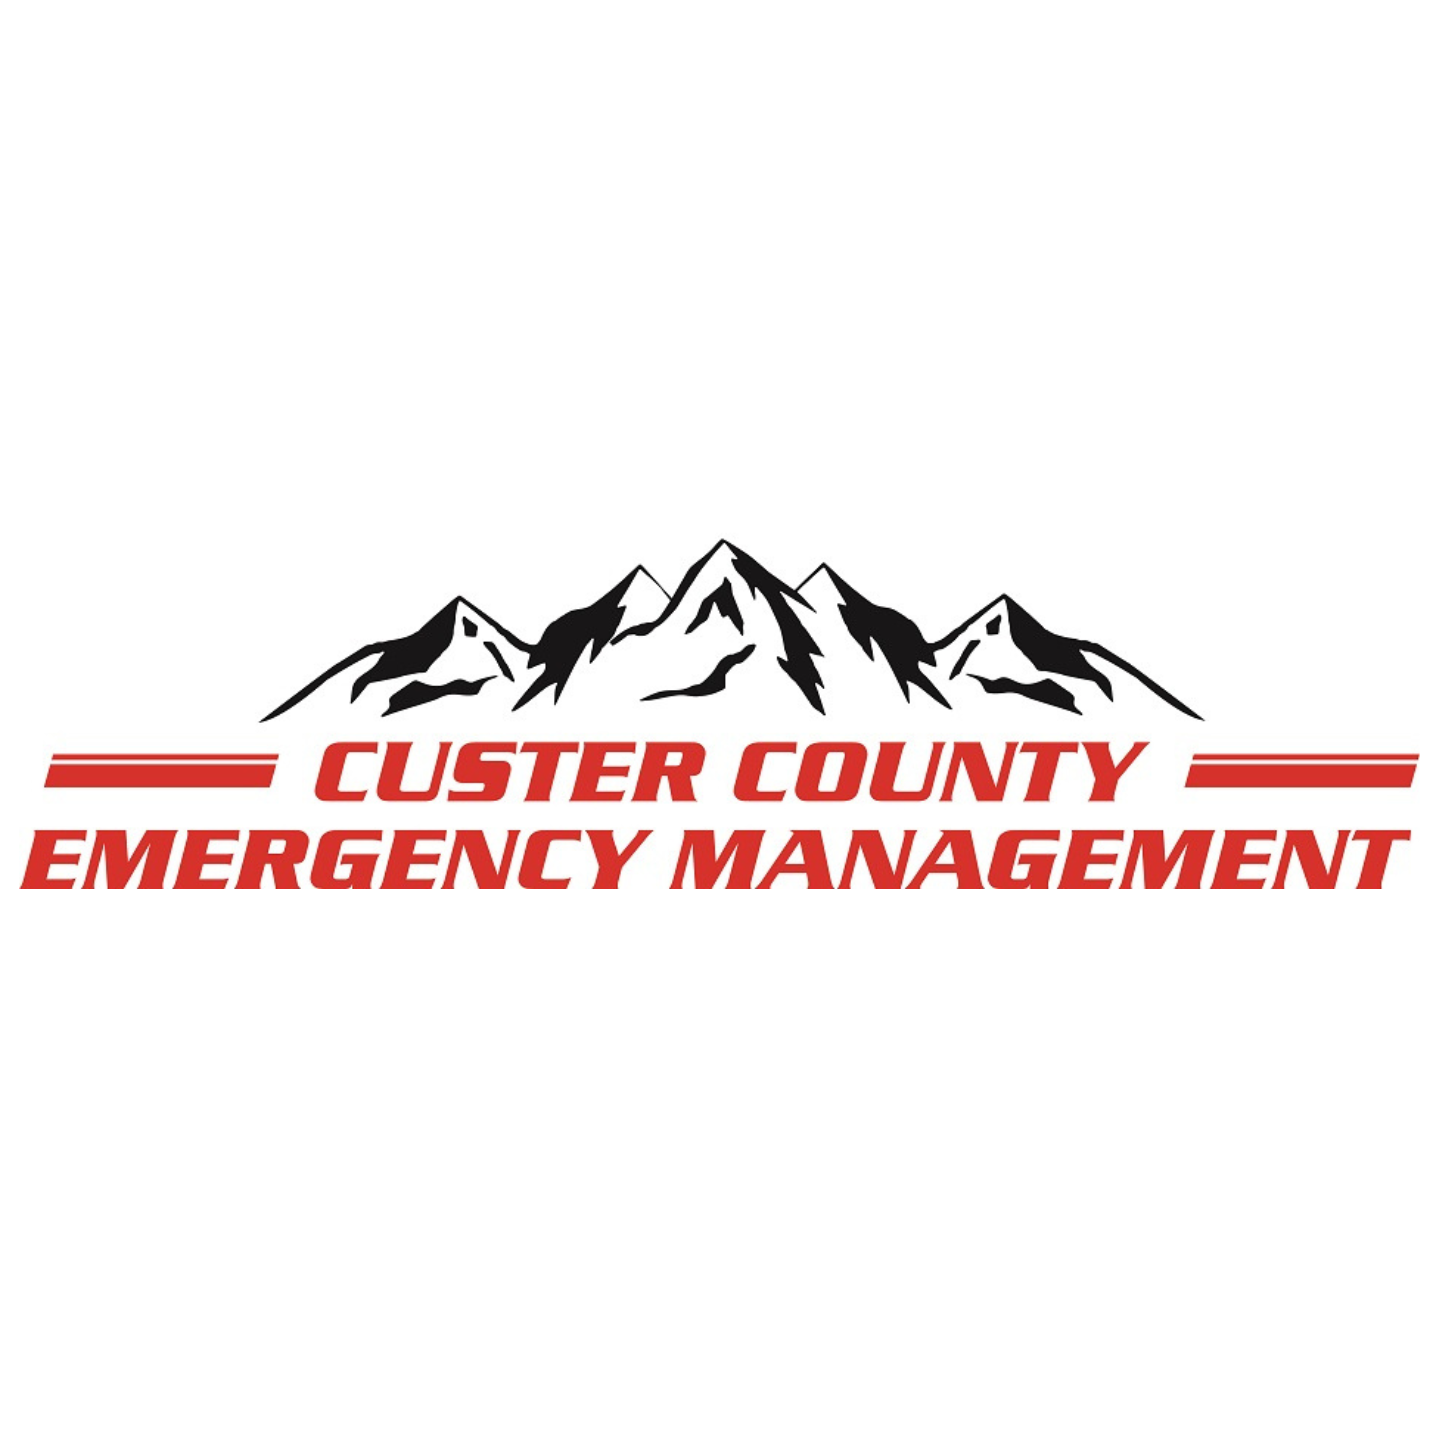 image of the Custer County Emergency Management logo